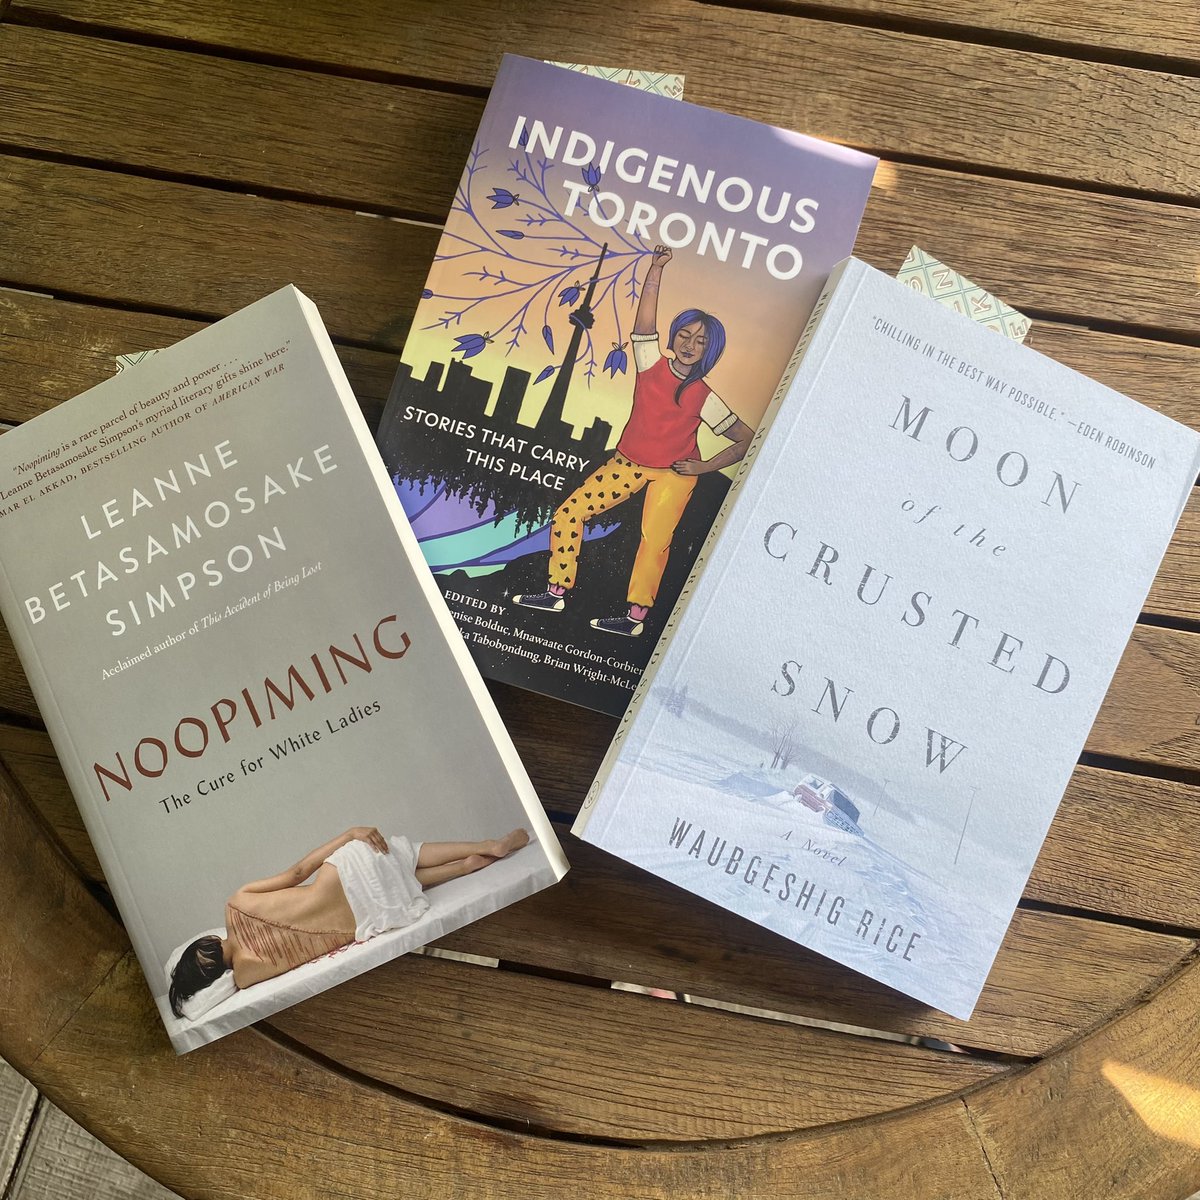 Some #CancelCanadaDay reading.

“Noopiming: The Cure for White Ladies” by Leanne Betasamosake Simpson.

“Indigenous Toronto: Stories that Carry This Place” featuring multiple editors and writers.

“Moon of the Crusted Snow” by Waubgeshig Rice